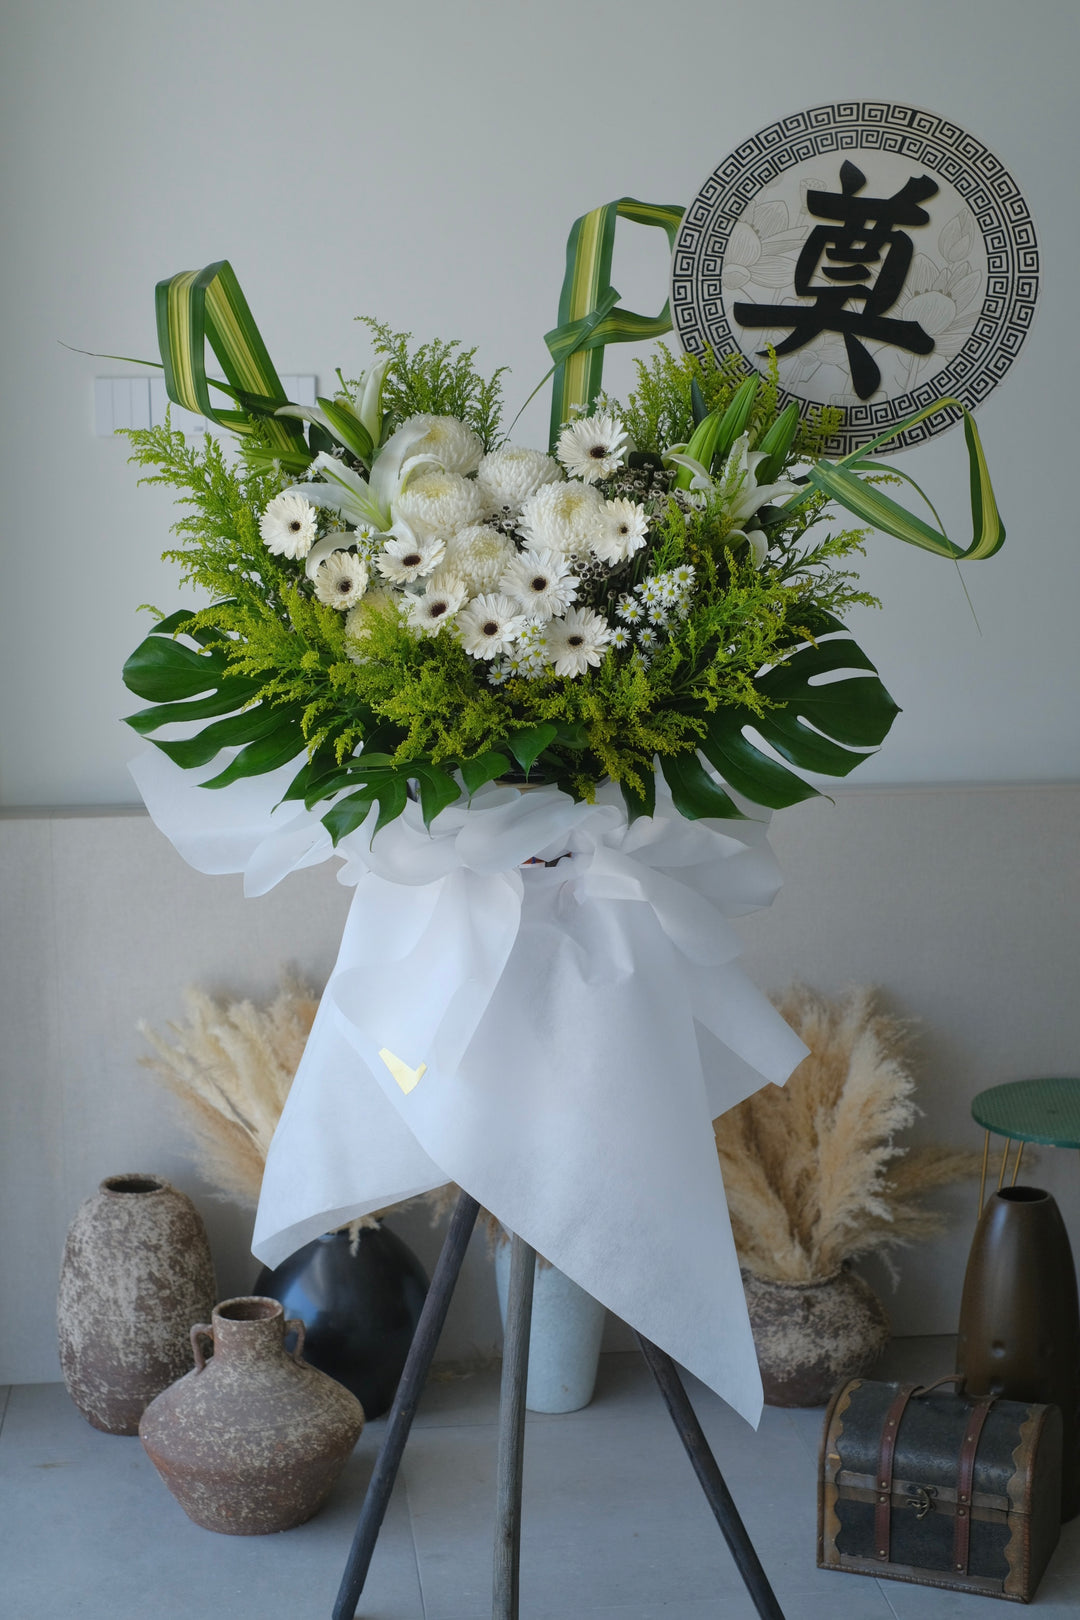 condolences flower penang, flower deliver kedah, white chrysanthemums and daisies to remember to your loved ones, by Bamboo Green Florist Penang